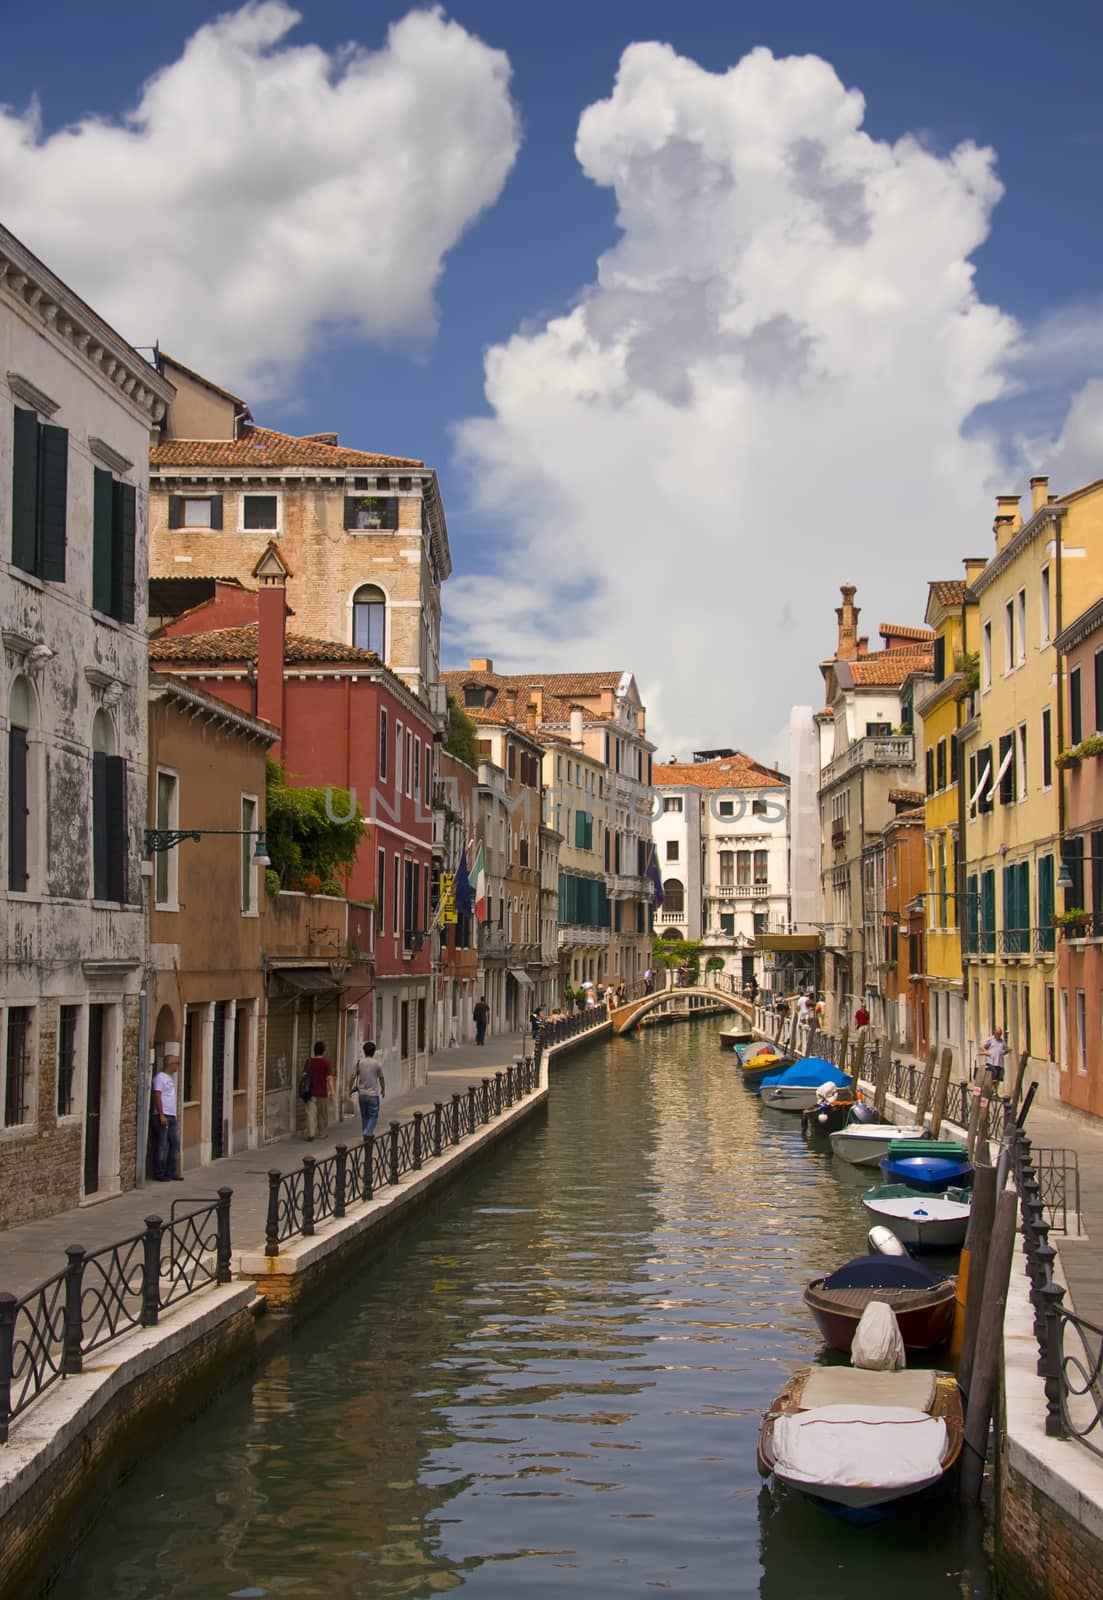 Idyllic canal view in Venice, Italy